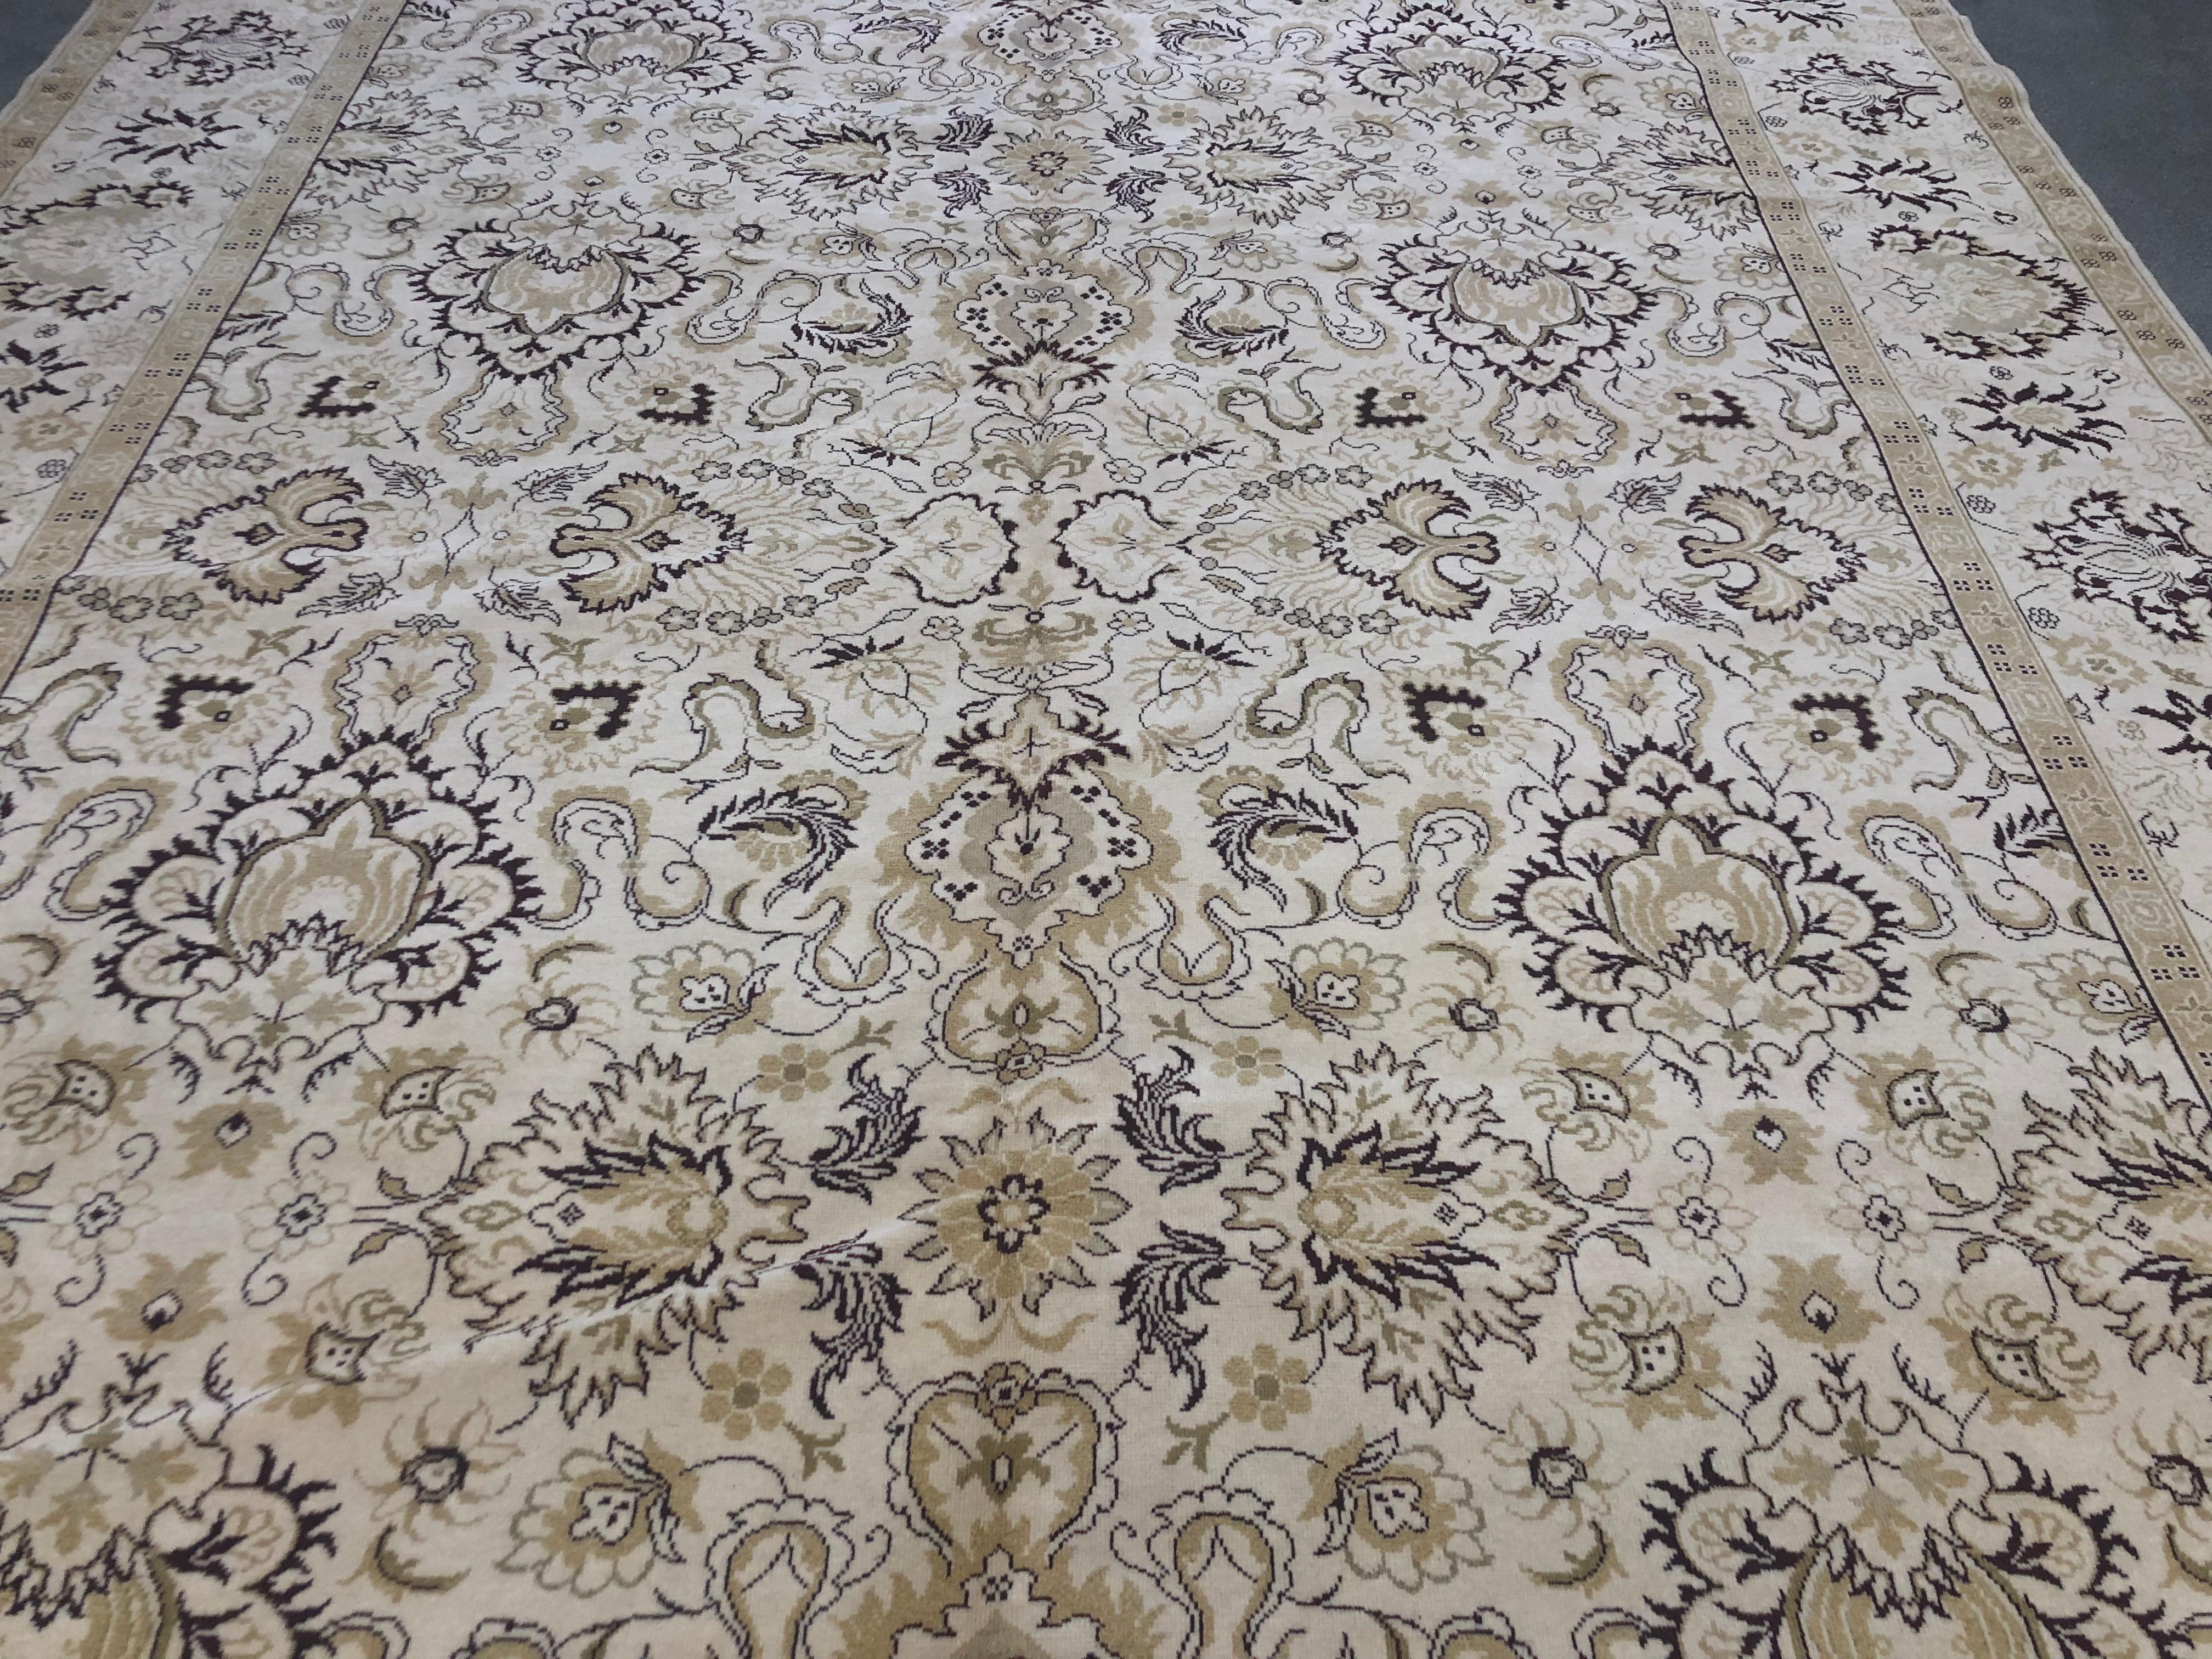 Light and dark have been woven together in a wonderfully intricate way in this floral pattern rug. Yellow, gold and claret. Hand knotted wool.